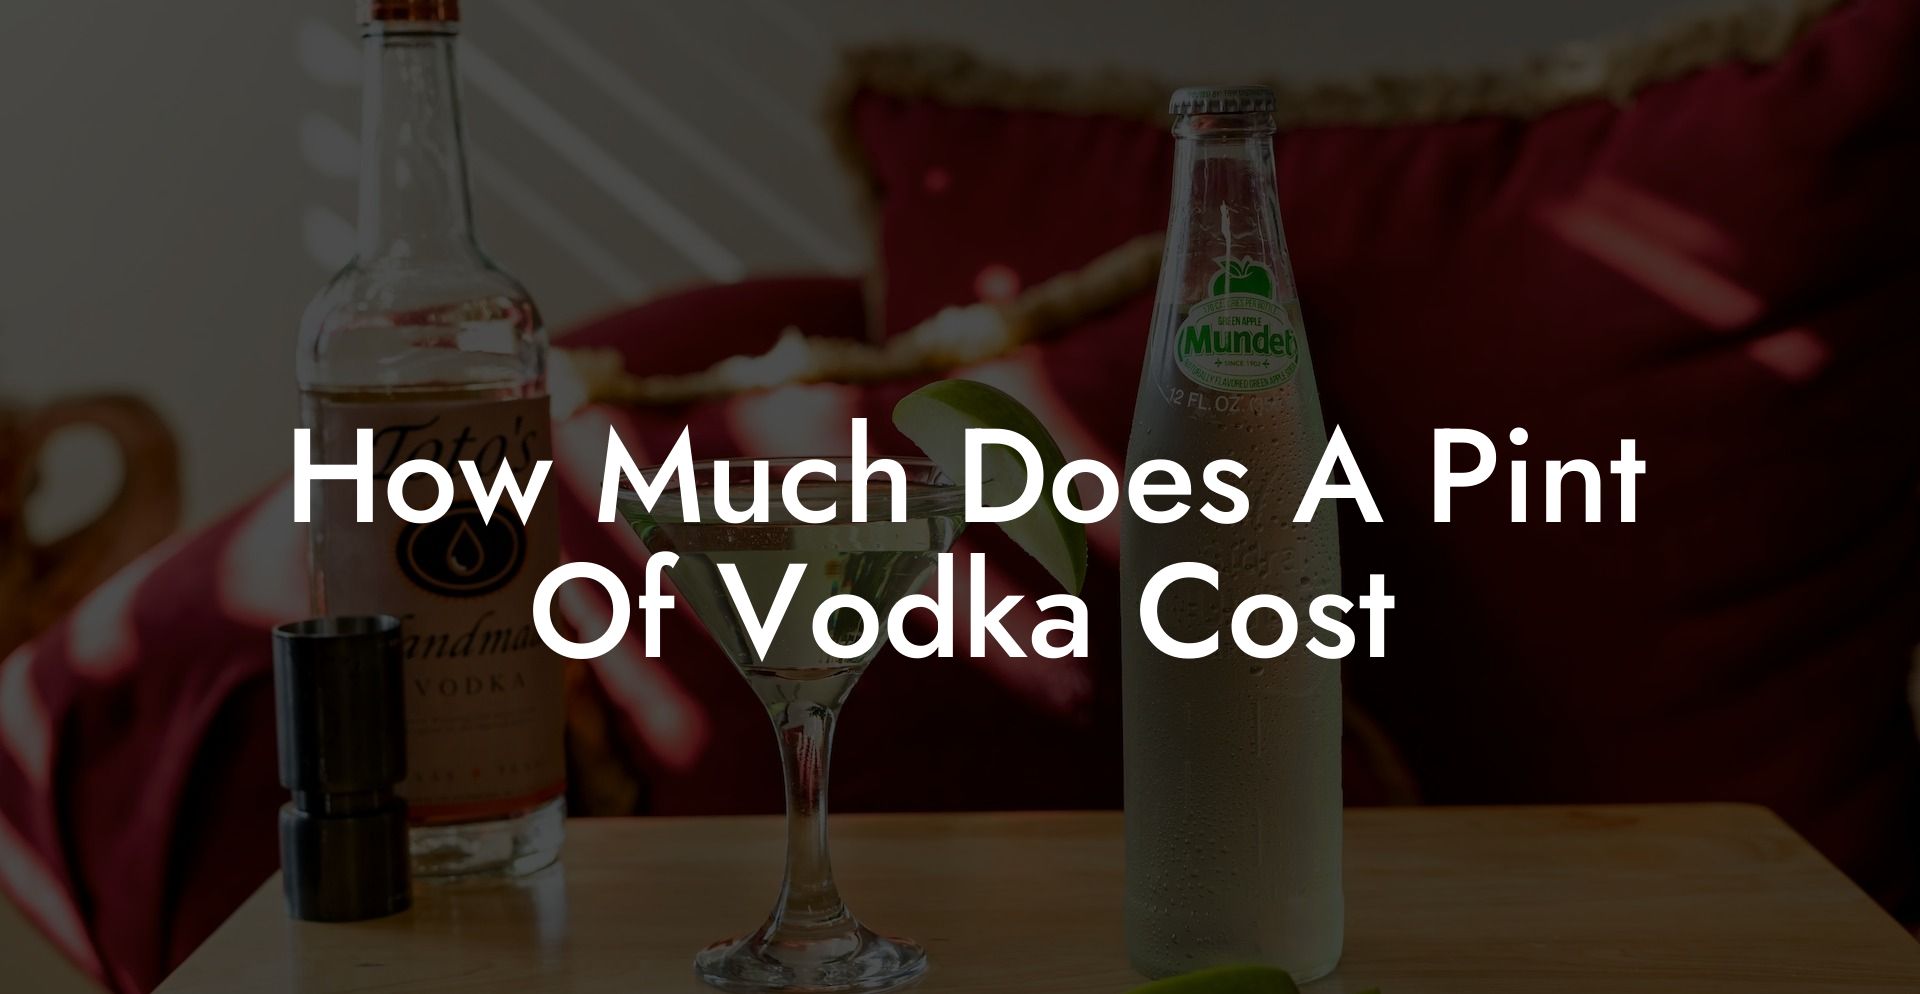 How Much Does A Pint Of Vodka Cost